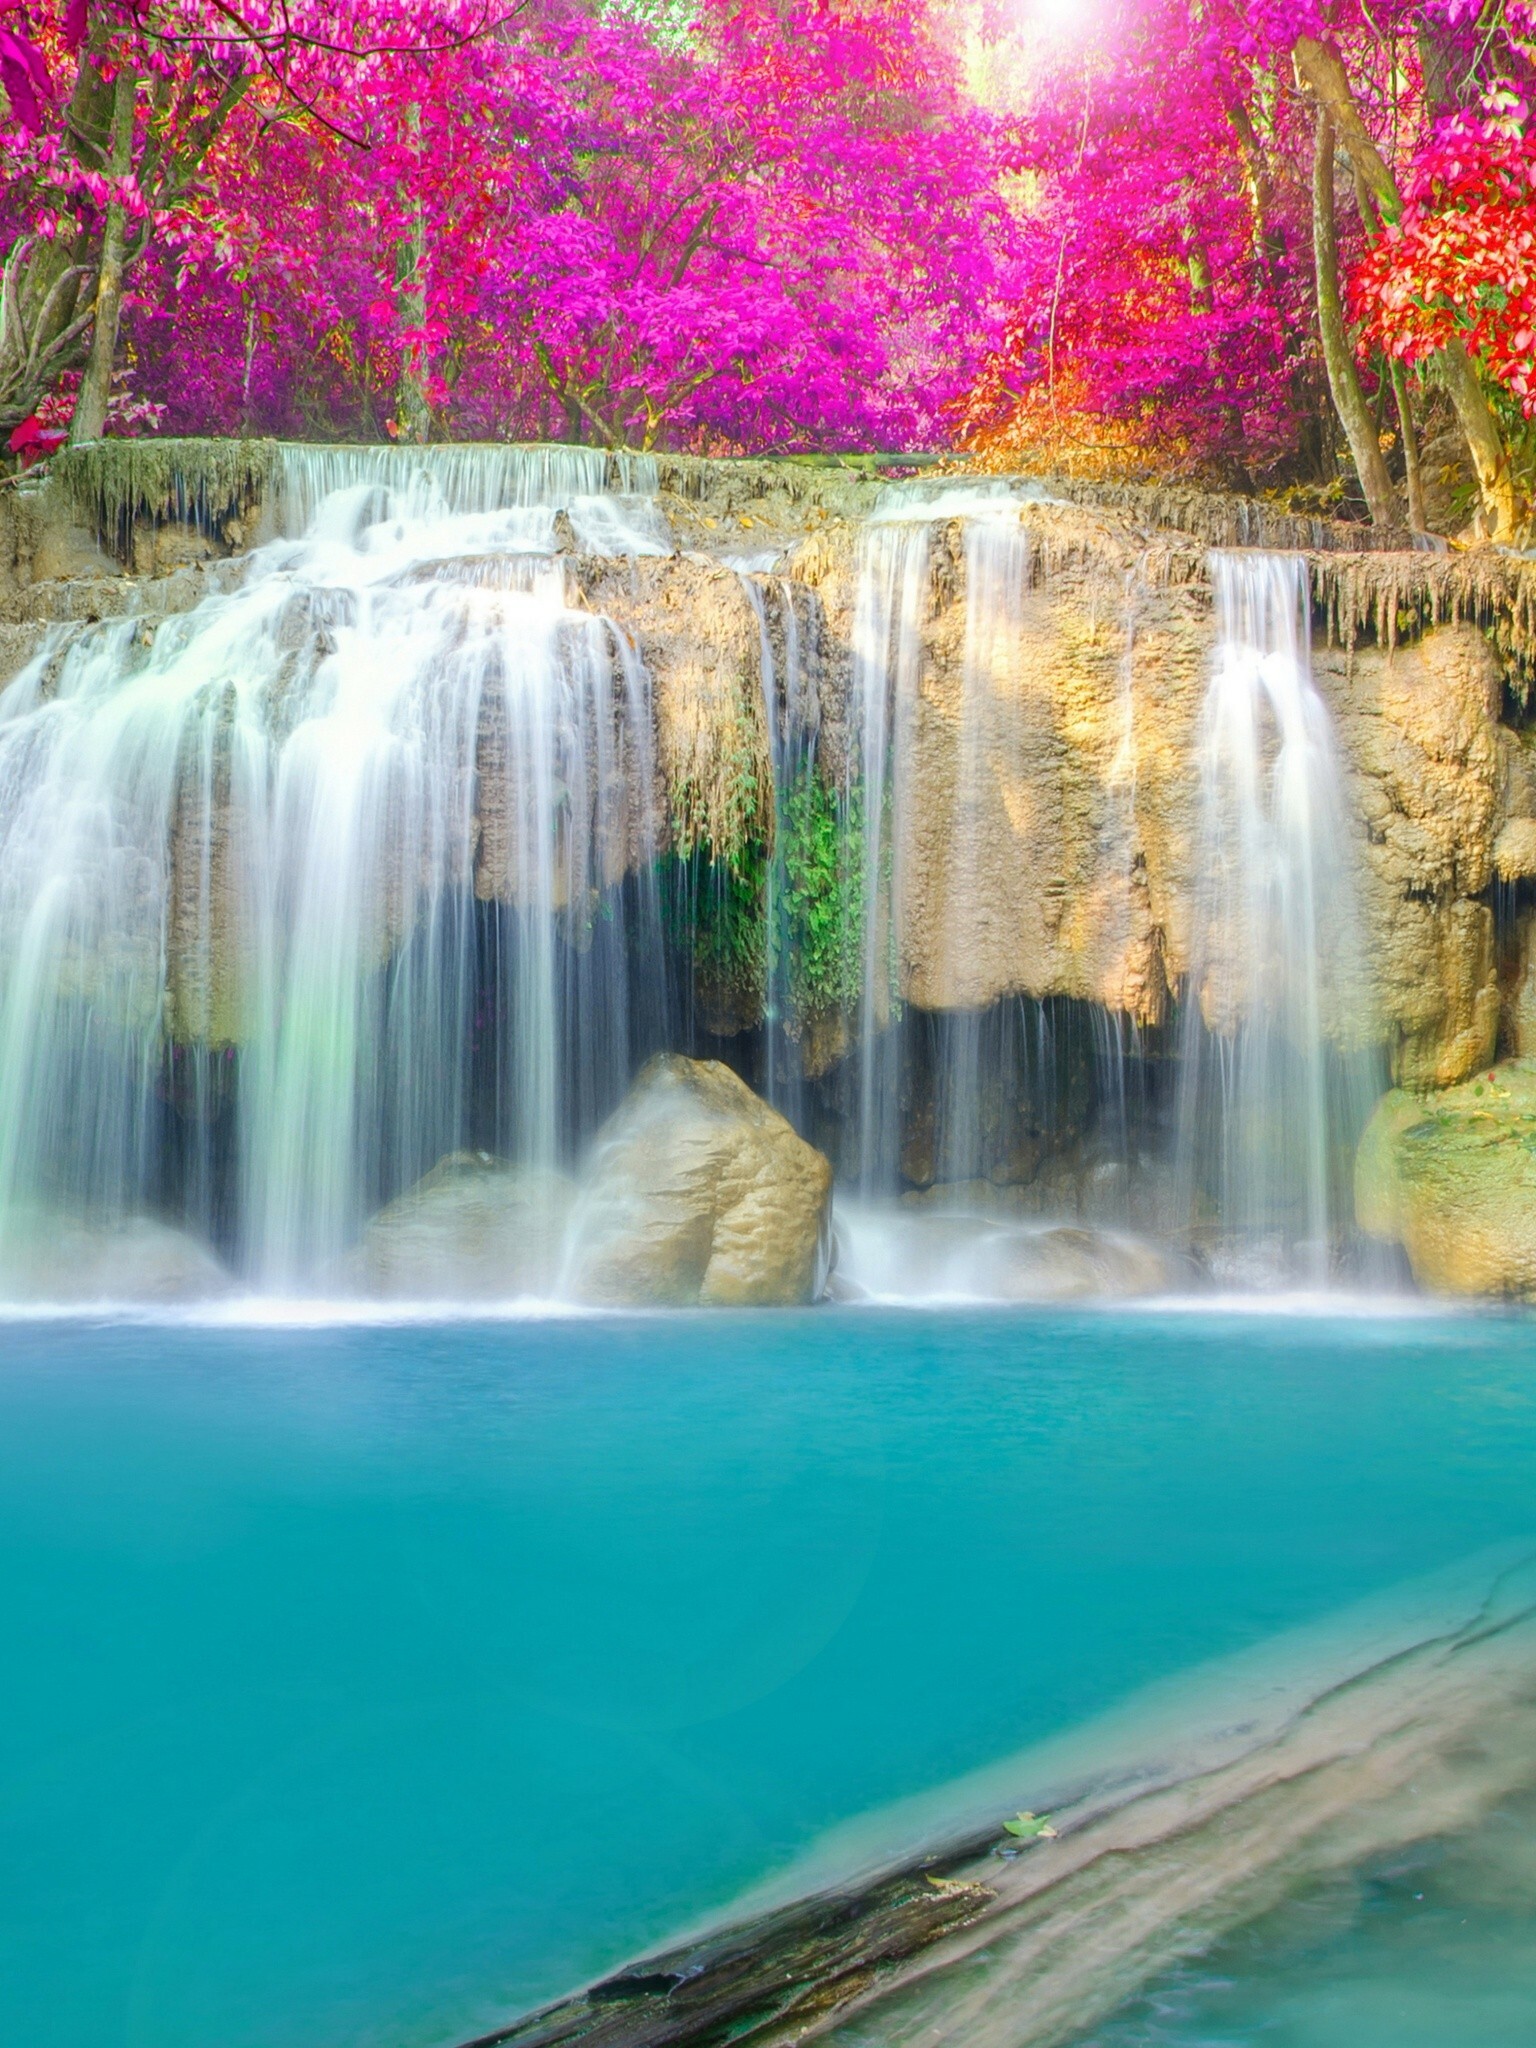 Waterfall: Thailand, A point in a river where water flows over a steep drop. 1540x2050 HD Wallpaper.